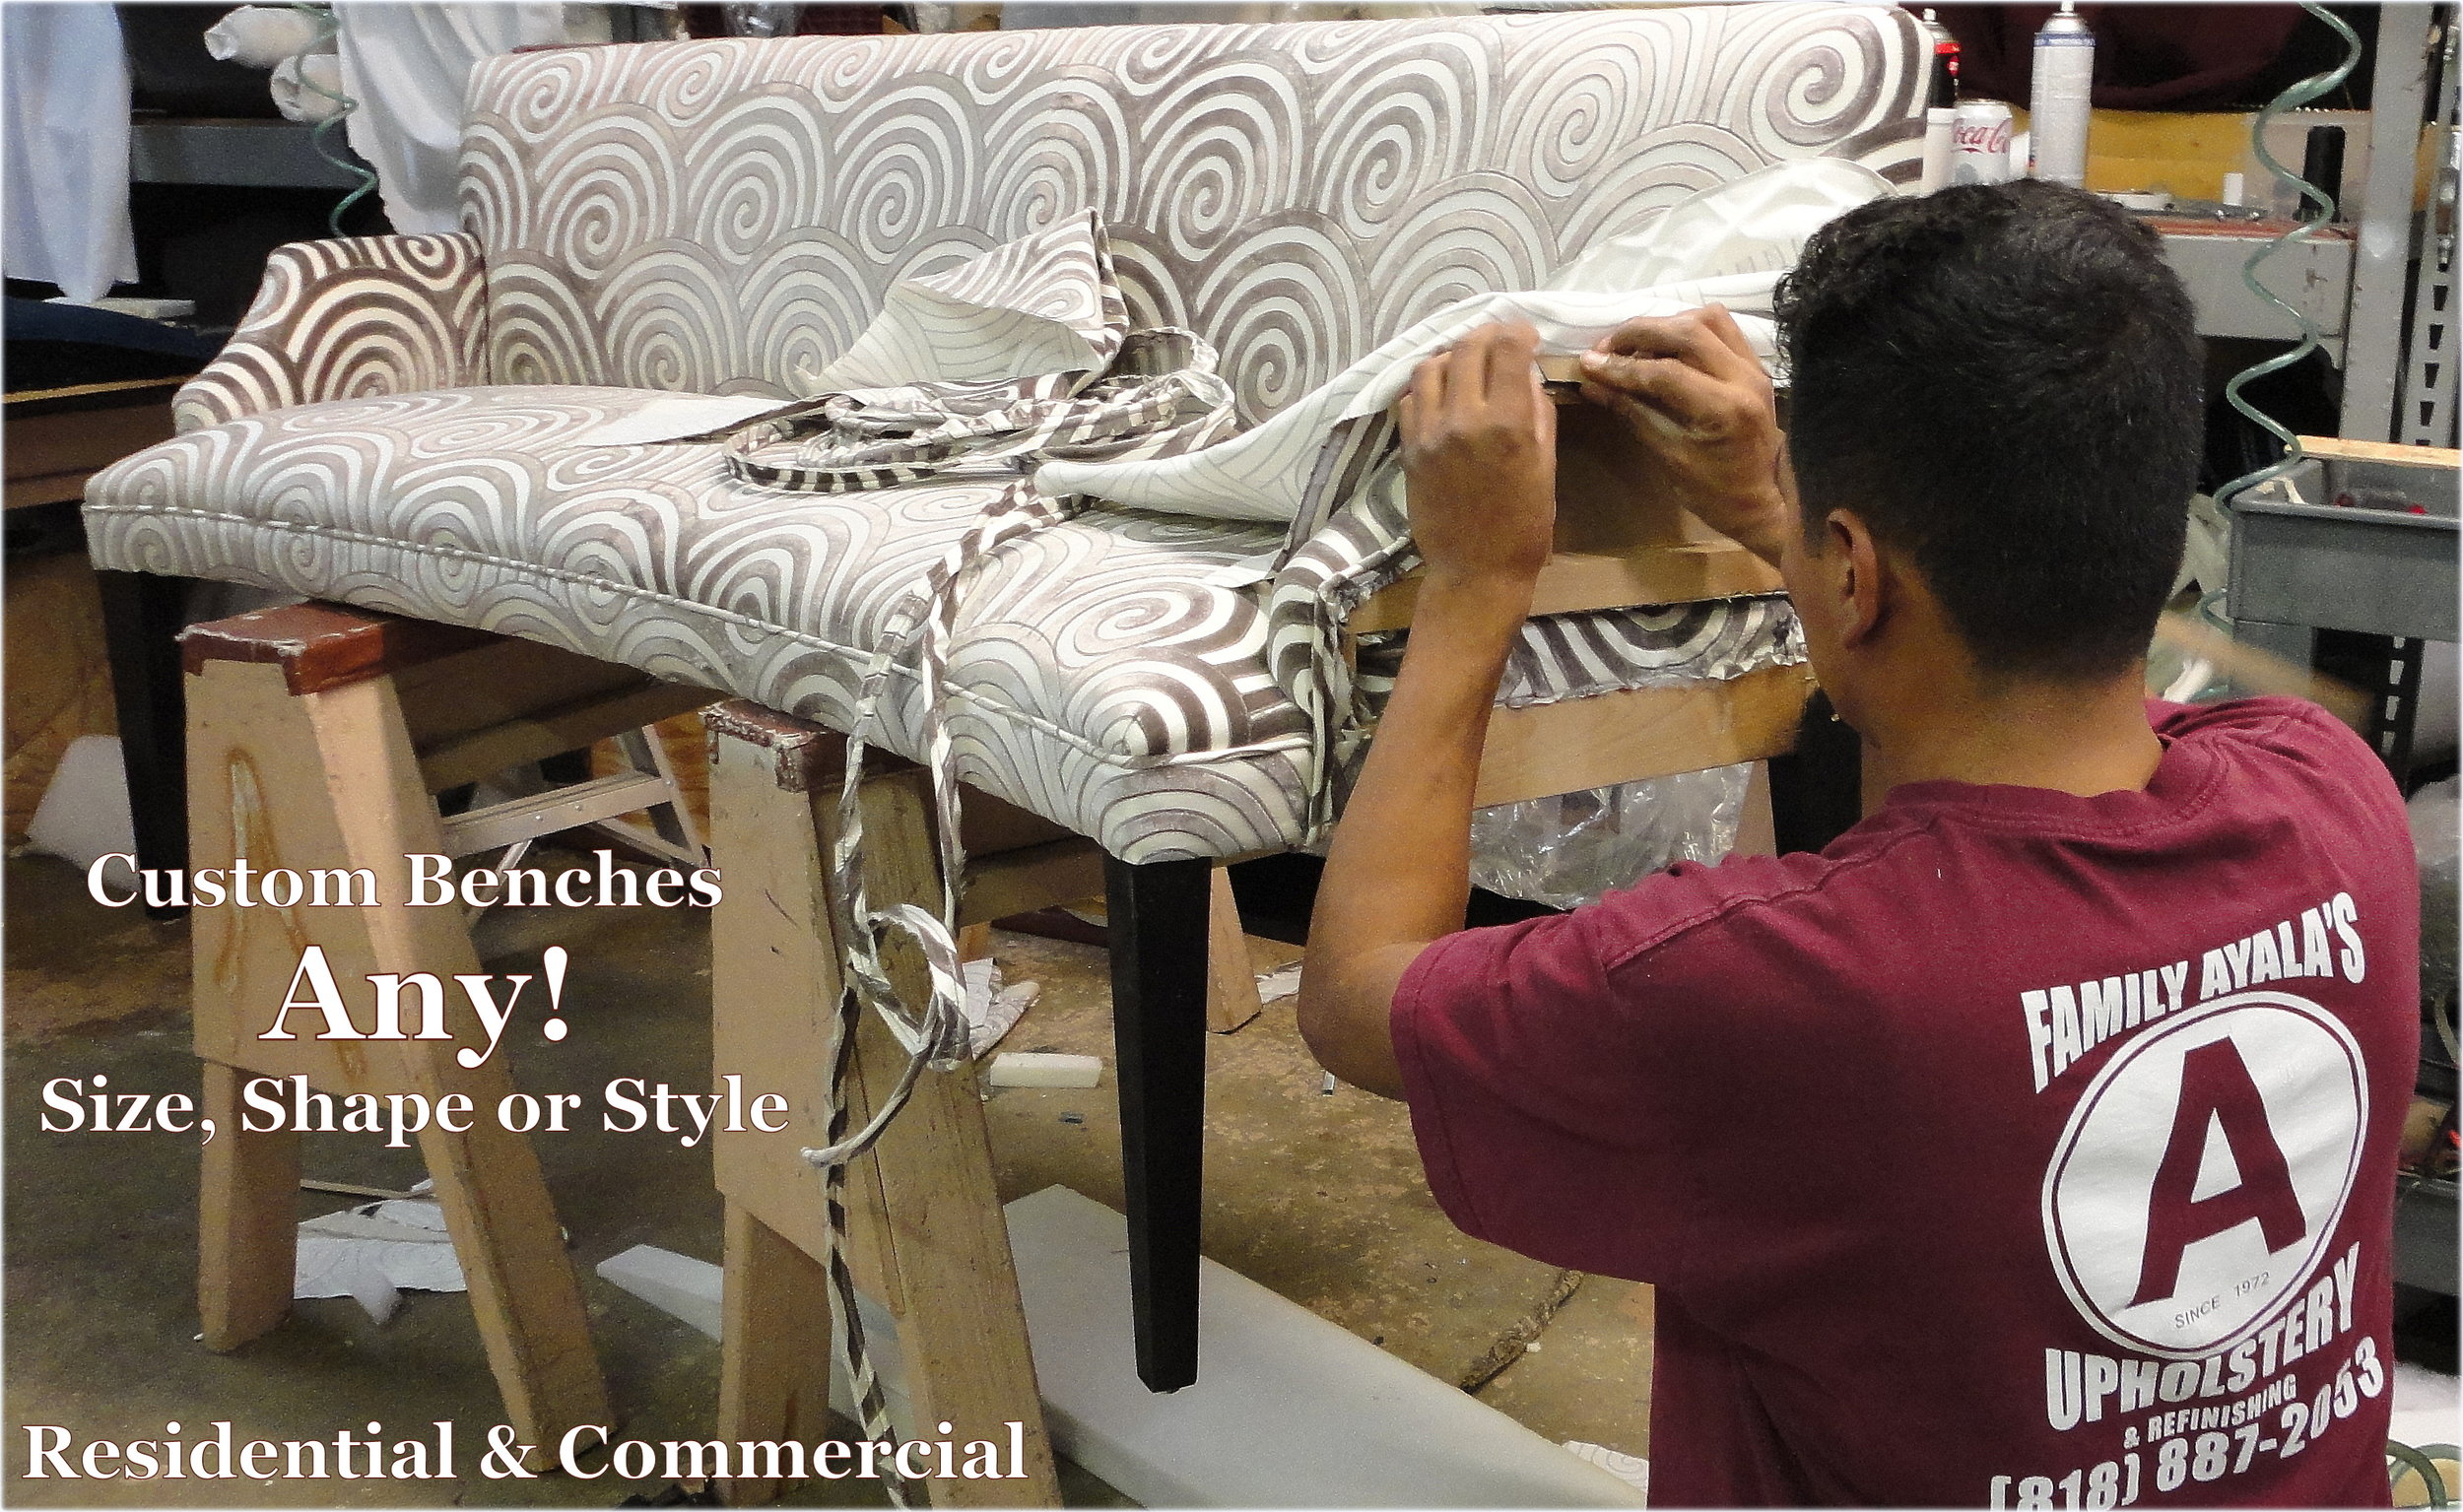 Custom Benches By Ayala's Upholstery.jpg